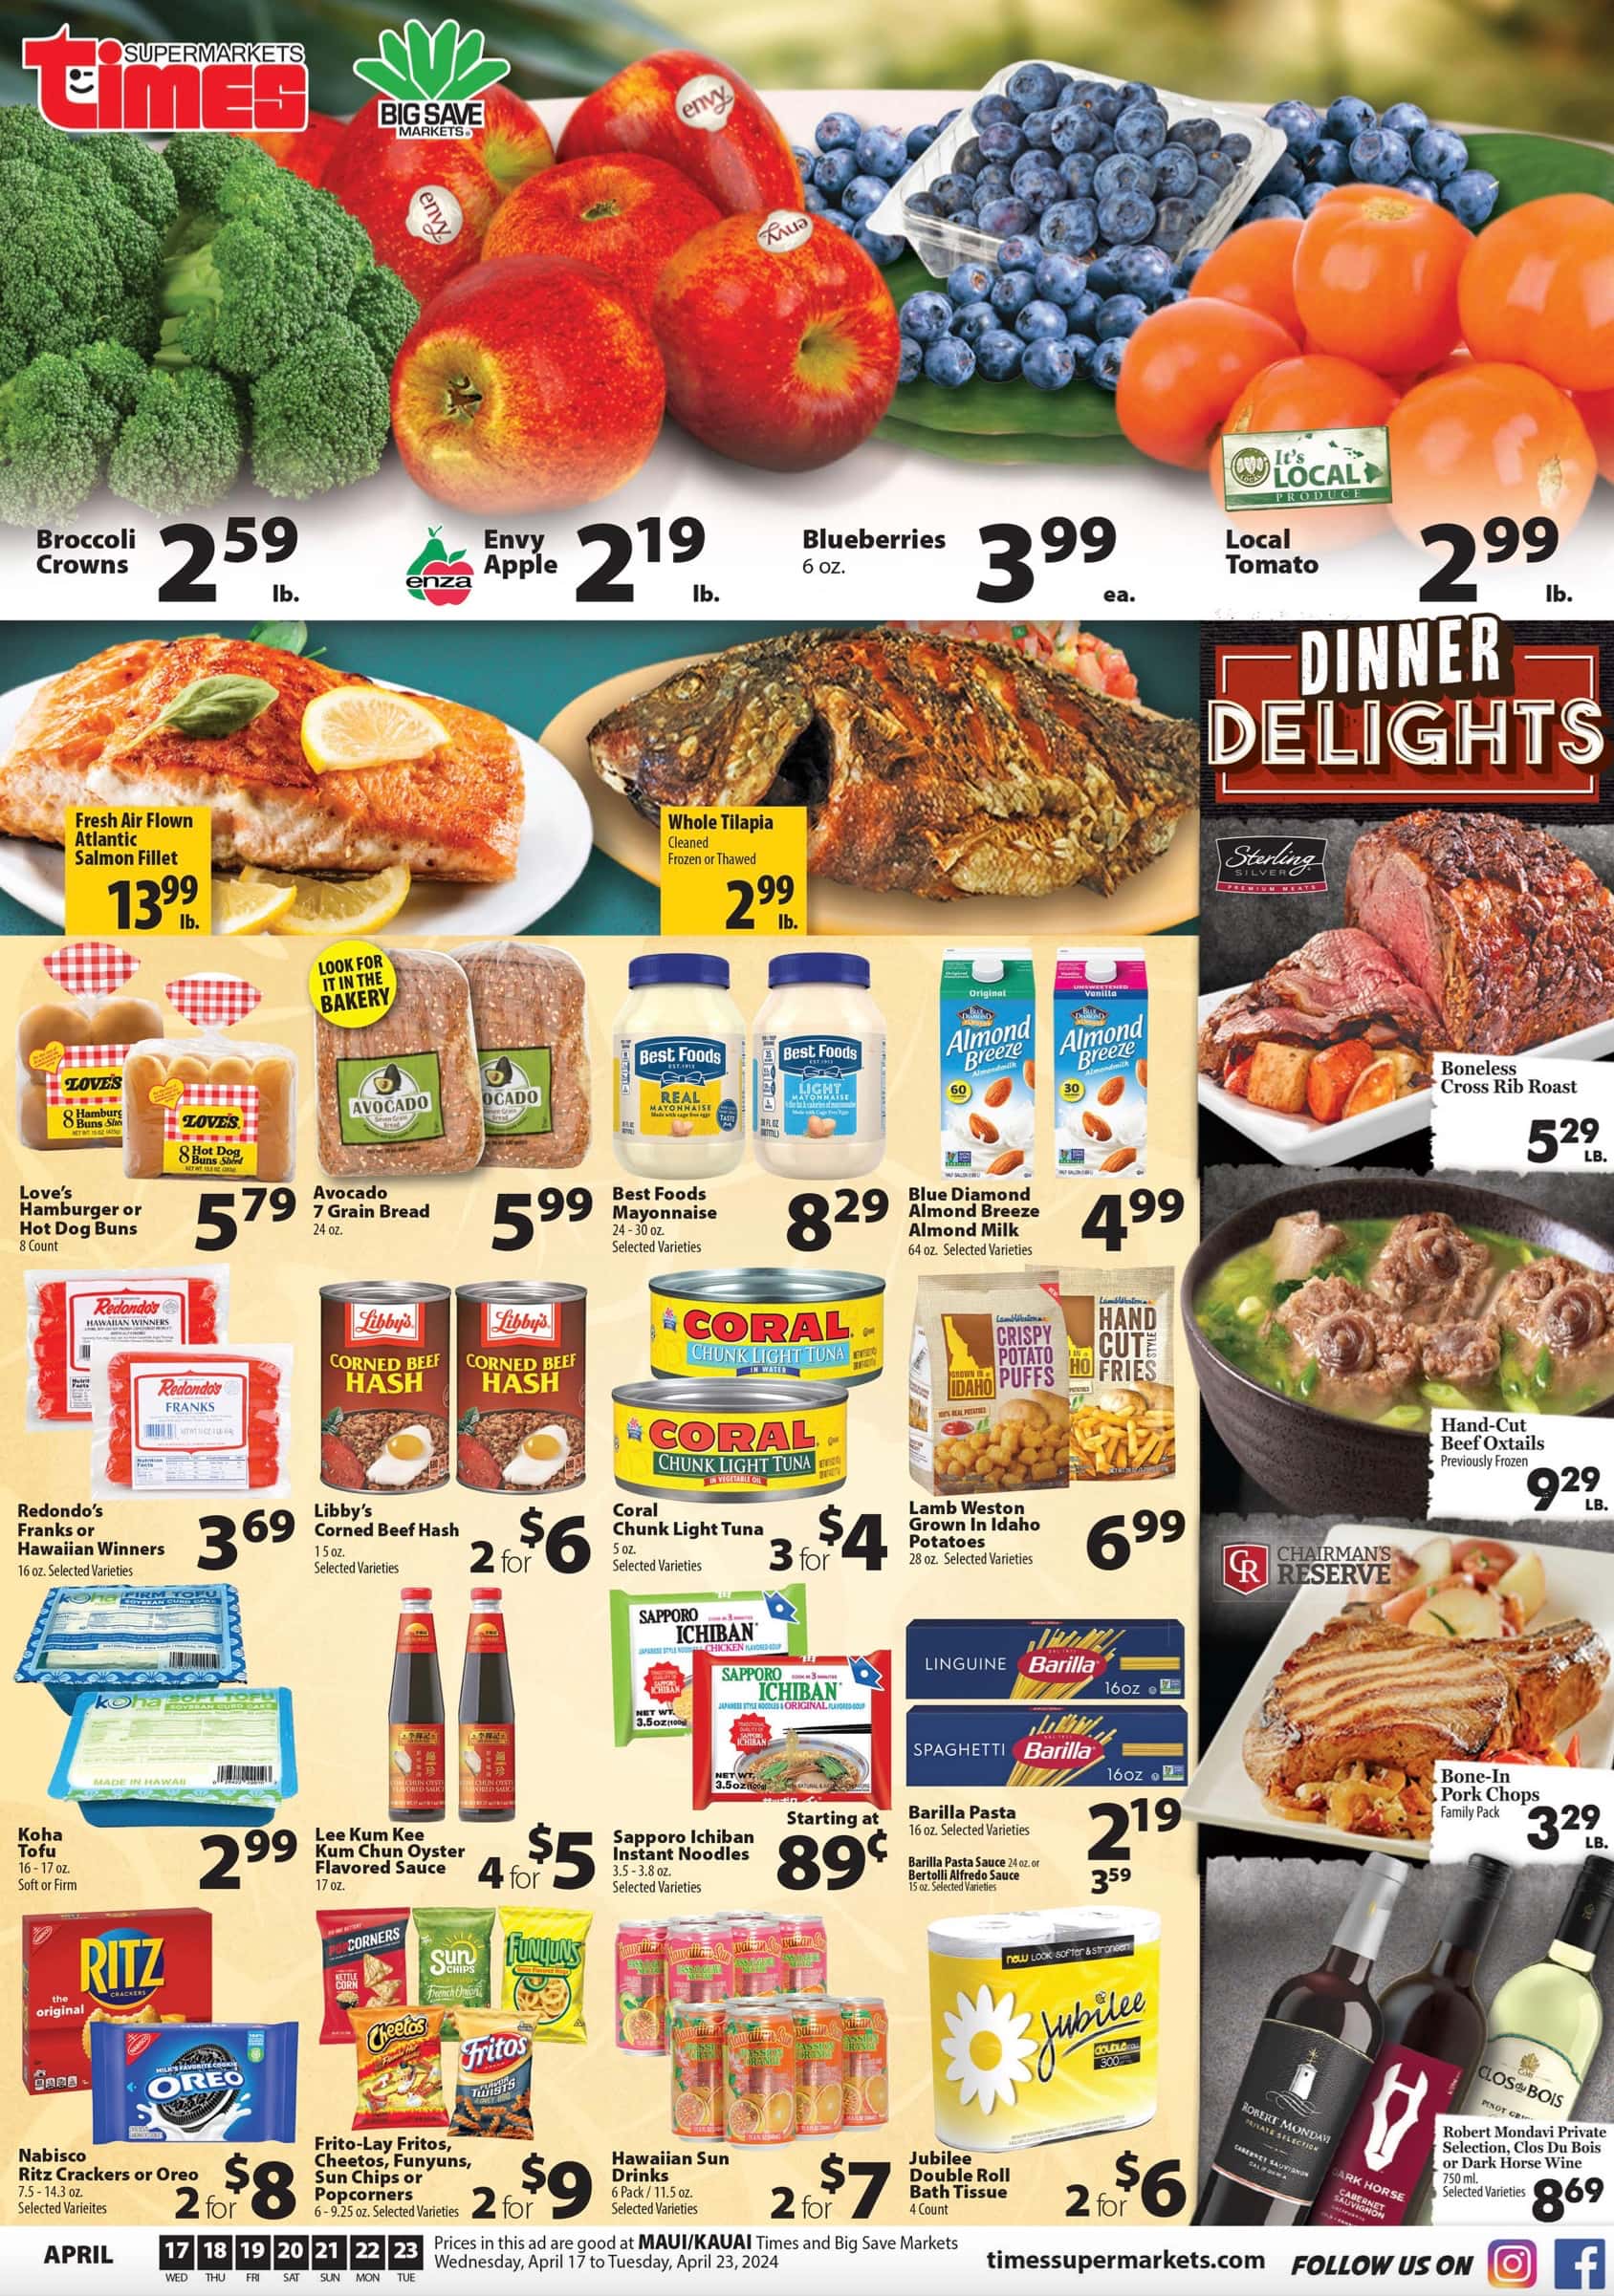 TimesSupermarkets_weekly_ad_041724_01